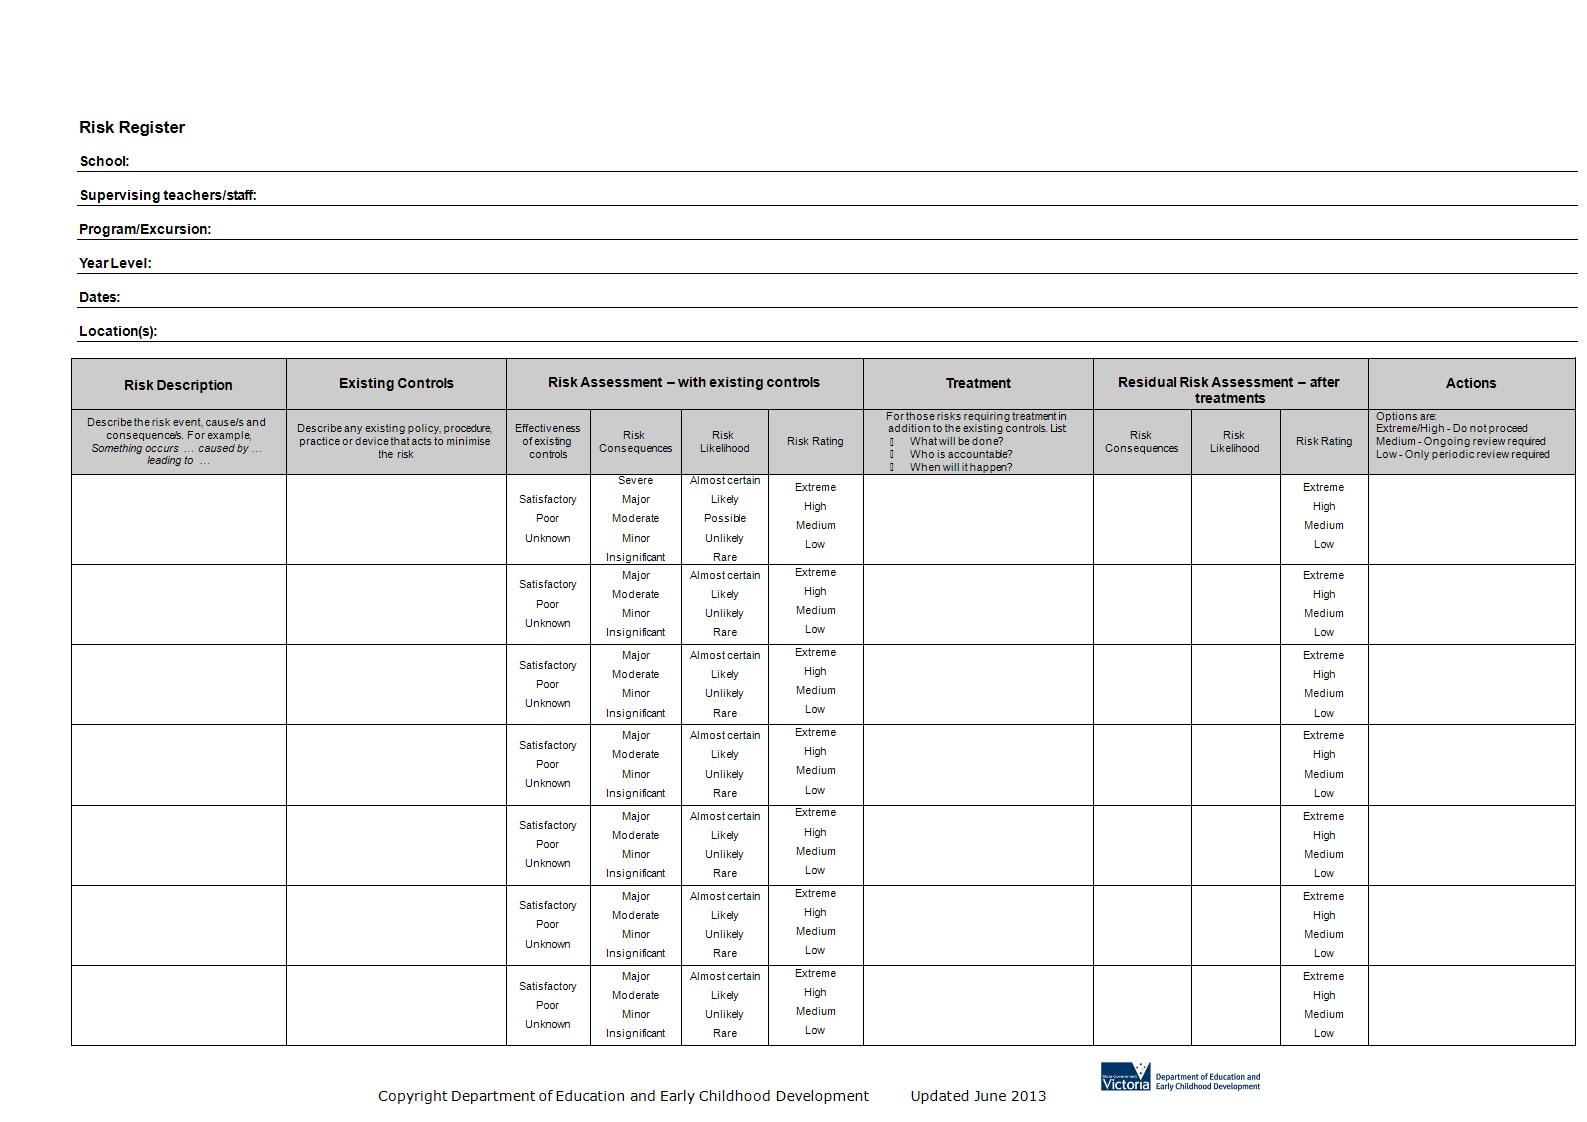 usable risk register template example